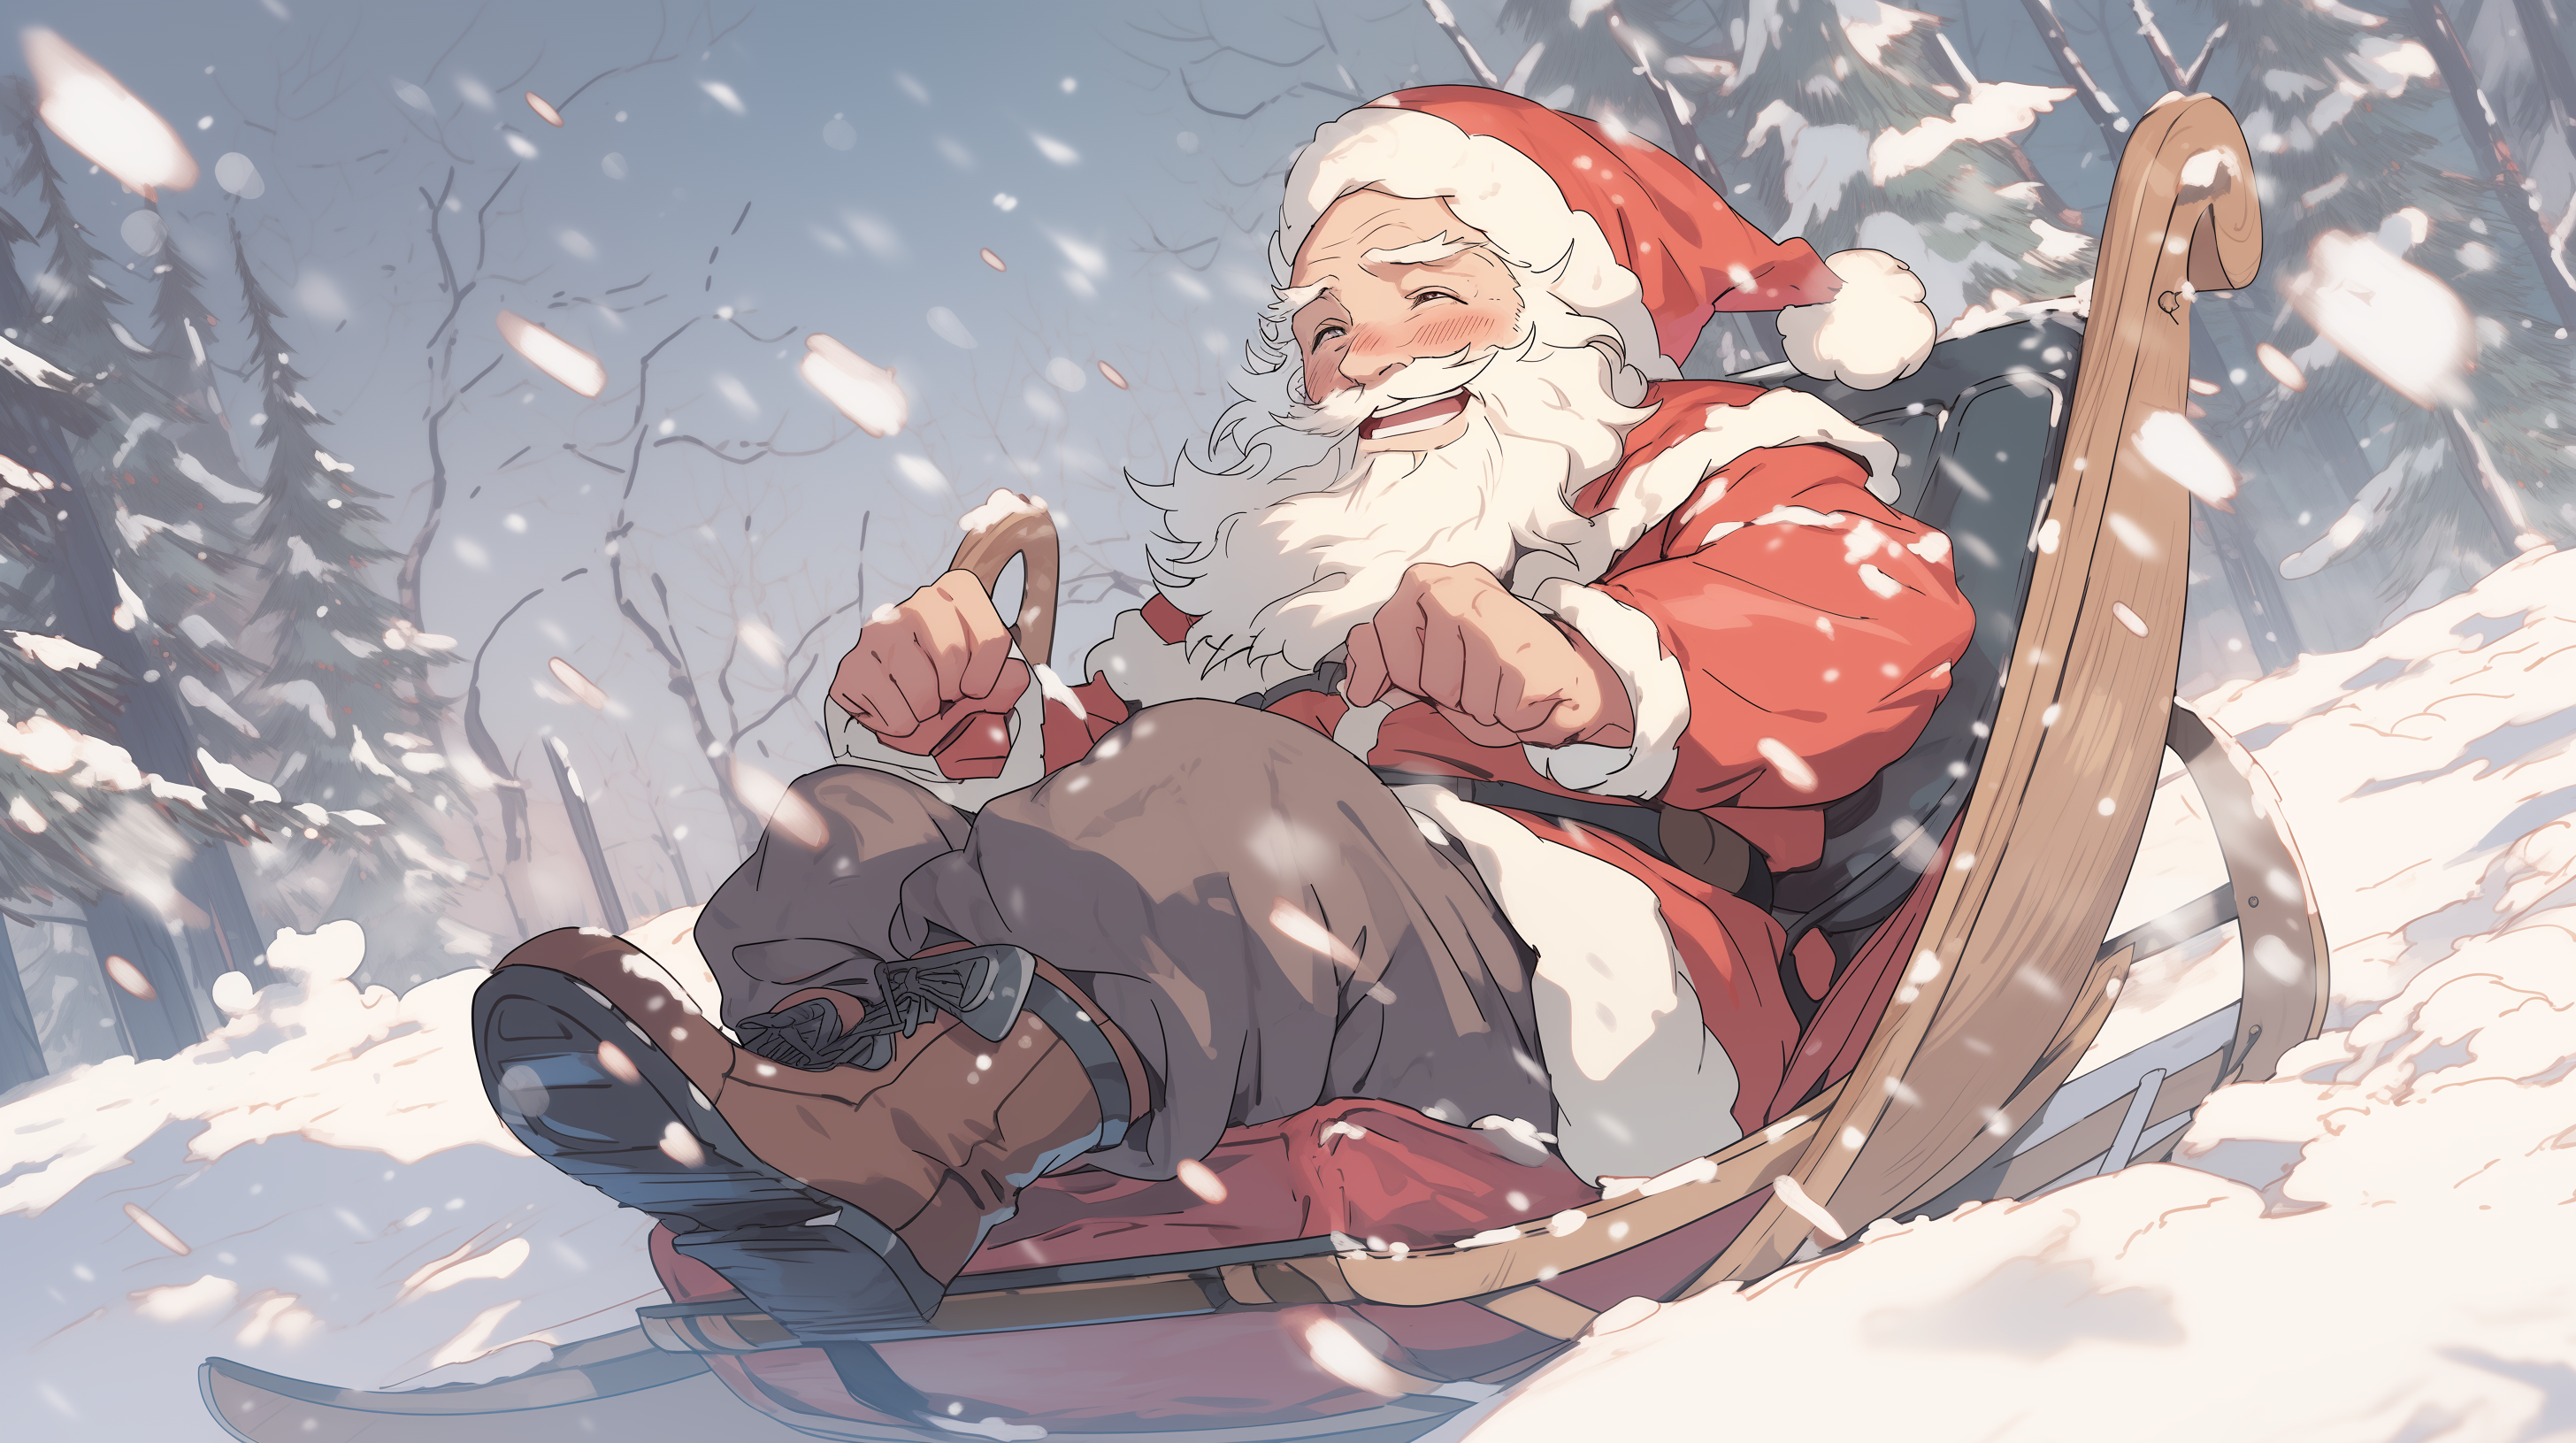 Holiday Cheer With Santa On Sled HD Christmas Wallpaper By Laxmonaut